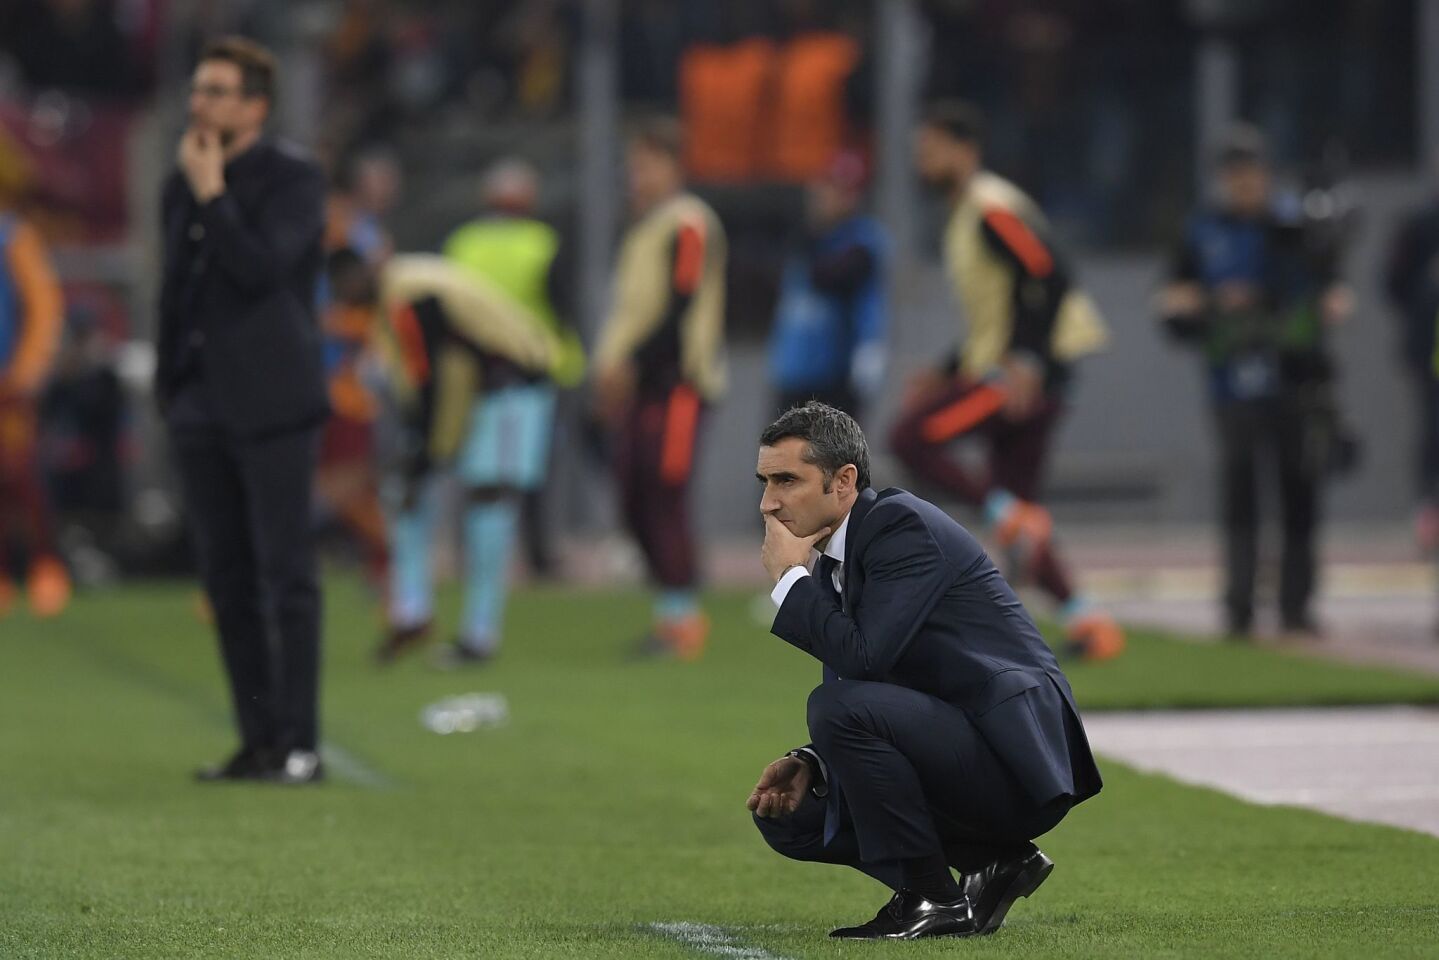 FC Barcelona's Spanish head coach Ernesto Valverde looks on during the UEFA Champions League quarter-final second leg football match between AS Roma and FC Barcelona at the Olympic Stadium in Rome on April 10, 2018.